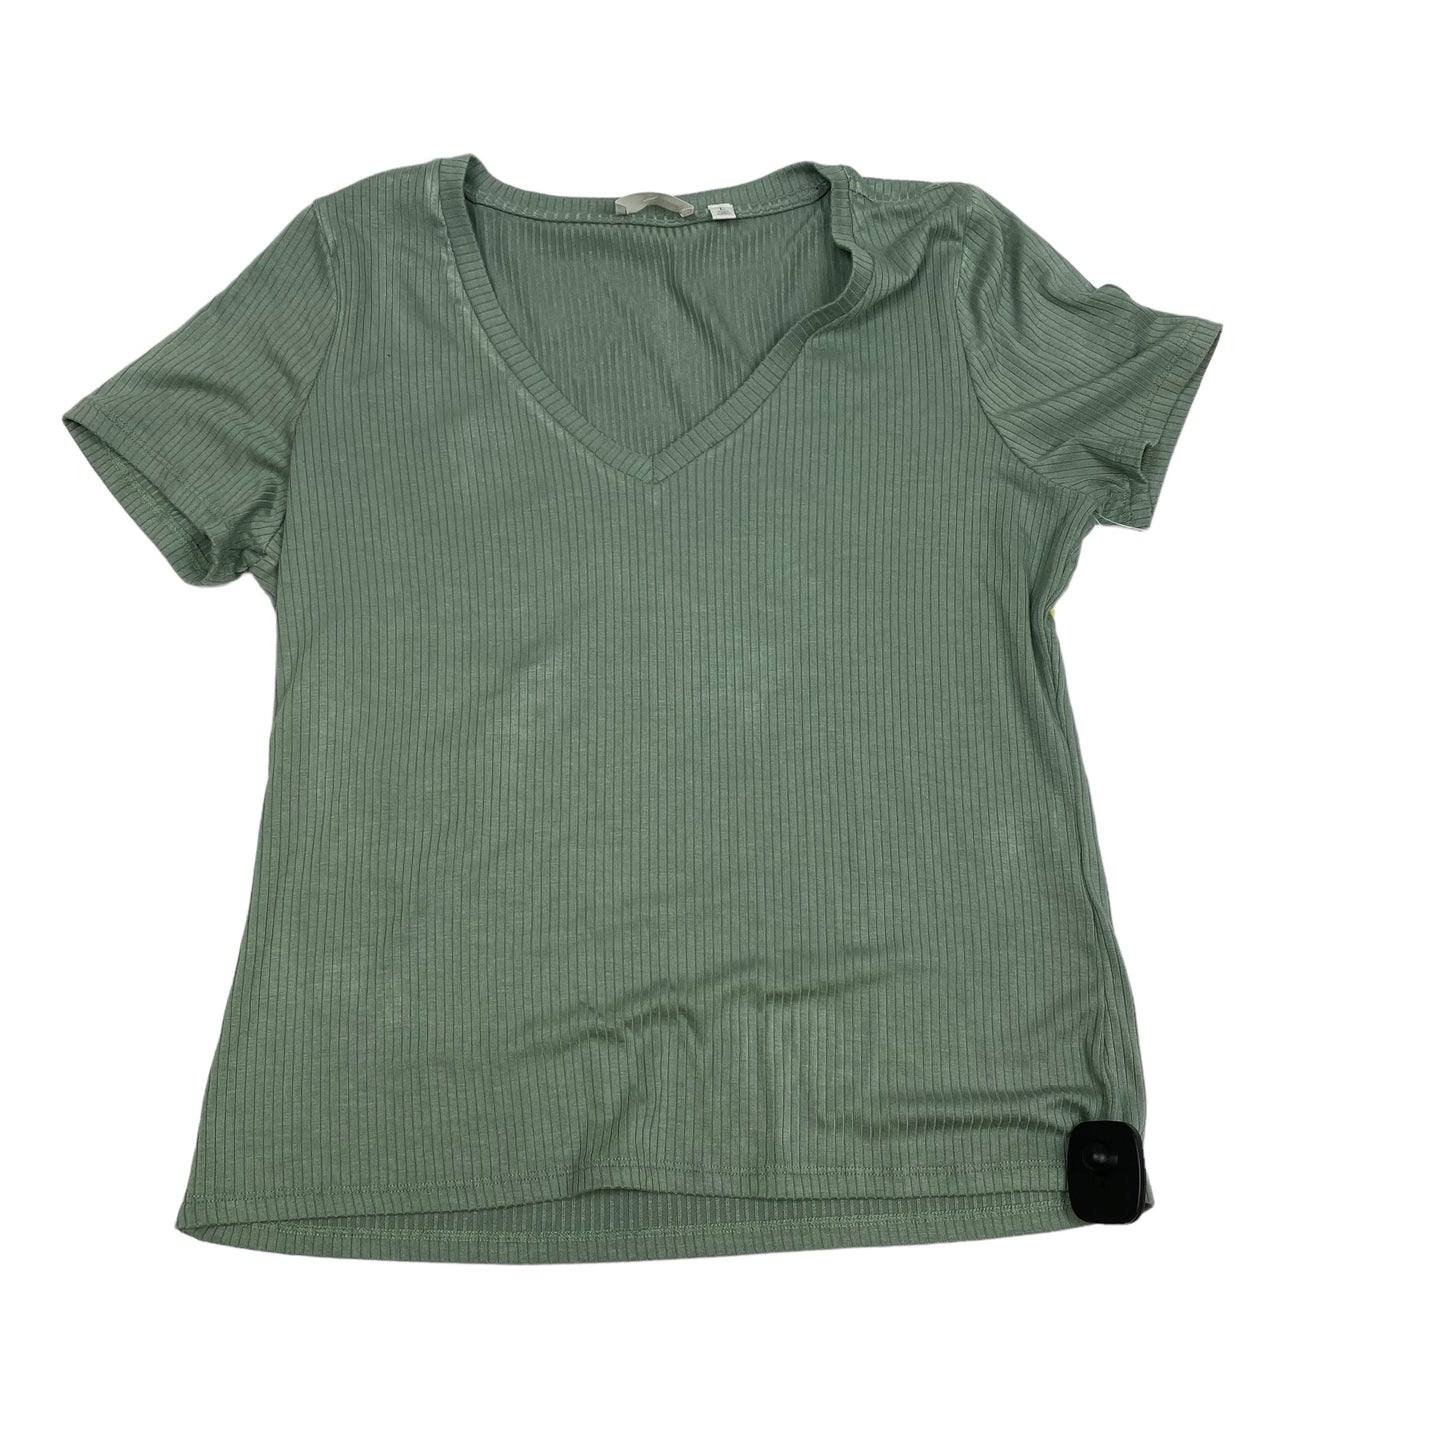 Green Top Short Sleeve Cyrus Knits, Size L